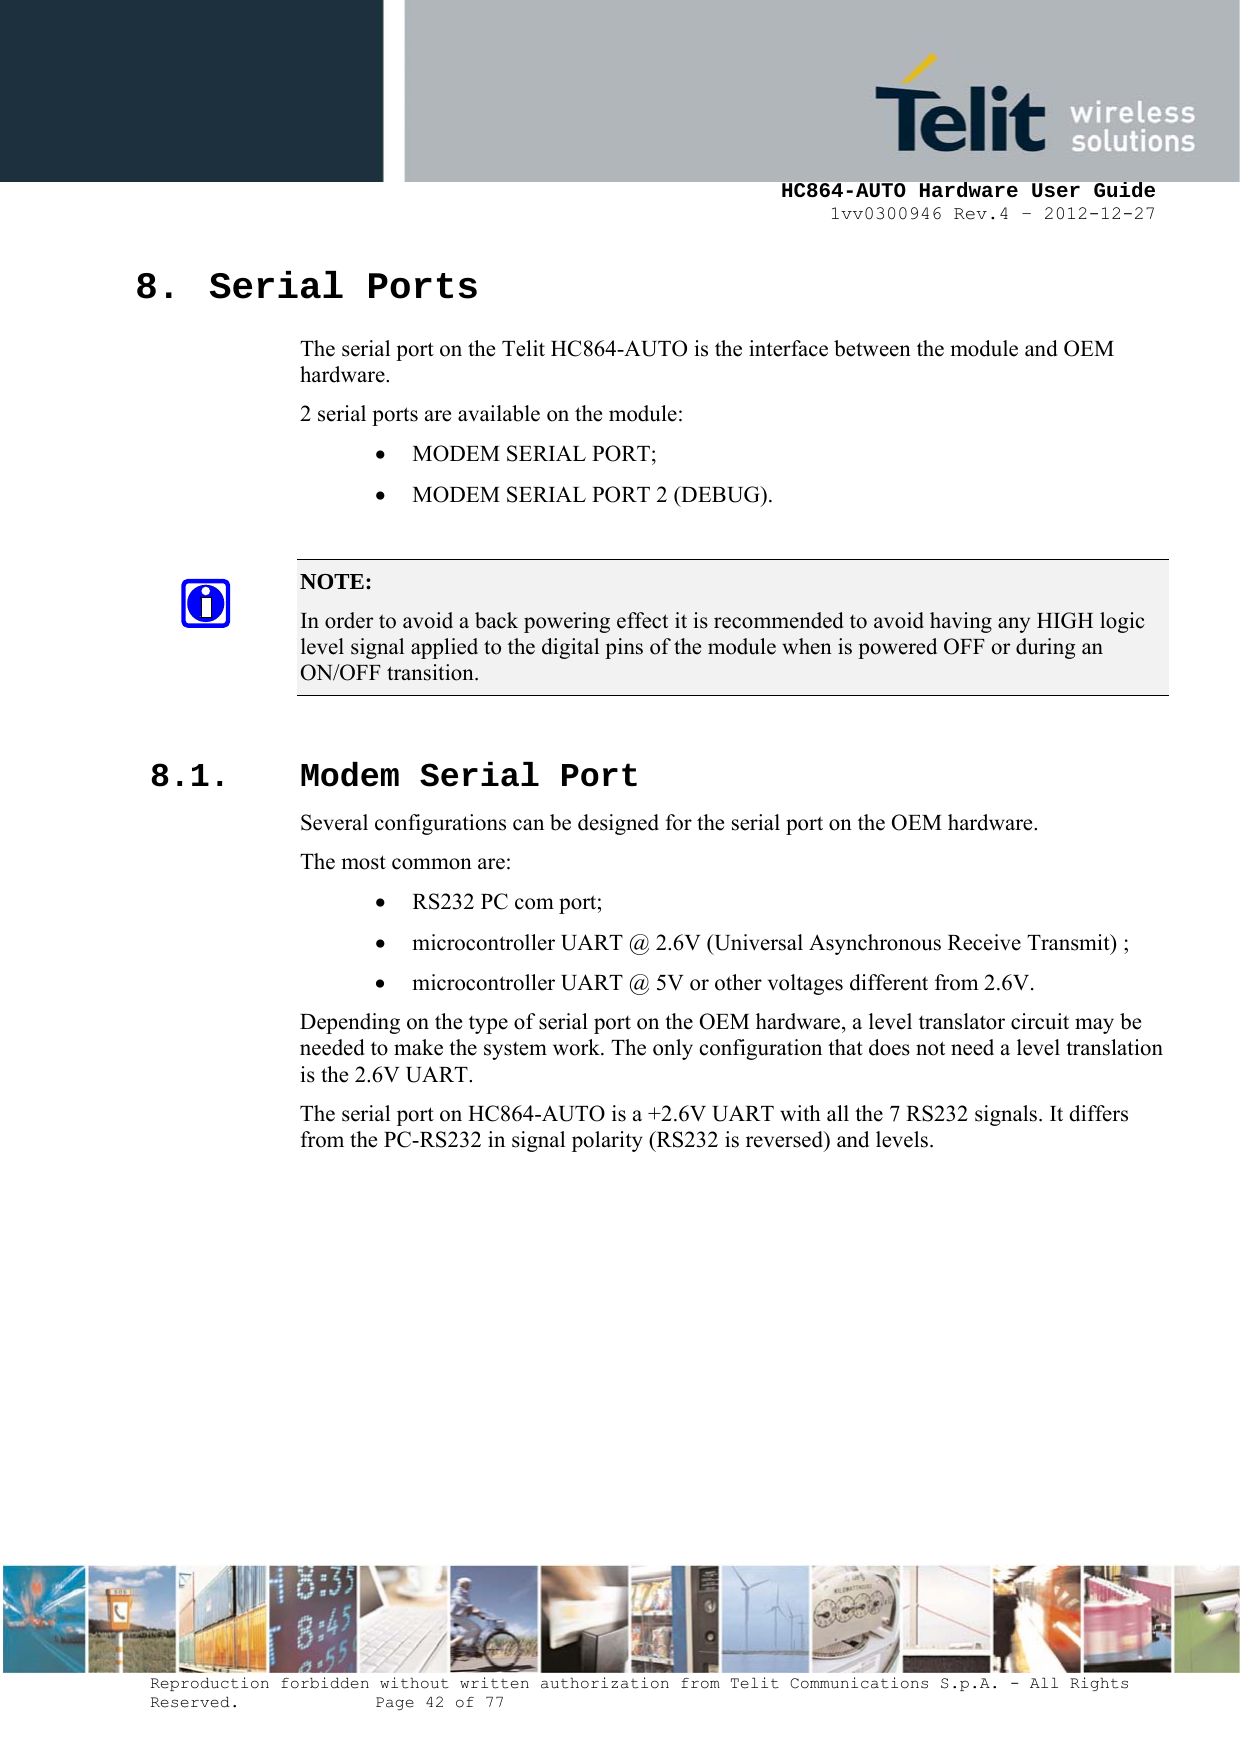     HC864-AUTO Hardware User Guide 1vv0300946 Rev.4 – 2012-12-27 Reproduction forbidden without written authorization from Telit Communications S.p.A. - All Rights Reserved.    Page 42 of 77  8. Serial Ports The serial port on the Telit HC864-AUTO is the interface between the module and OEM hardware.  2 serial ports are available on the module: • MODEM SERIAL PORT; • MODEM SERIAL PORT 2 (DEBUG).  NOTE:  In order to avoid a back powering effect it is recommended to avoid having any HIGH logic level signal applied to the digital pins of the module when is powered OFF or during an ON/OFF transition.  8.1. Modem Serial Port Several configurations can be designed for the serial port on the OEM hardware.  The most common are: • RS232 PC com port; • microcontroller UART @ 2.6V (Universal Asynchronous Receive Transmit) ; • microcontroller UART @ 5V or other voltages different from 2.6V. Depending on the type of serial port on the OEM hardware, a level translator circuit may be needed to make the system work. The only configuration that does not need a level translation is the 2.6V UART. The serial port on HC864-AUTO is a +2.6V UART with all the 7 RS232 signals. It differs from the PC-RS232 in signal polarity (RS232 is reversed) and levels.  